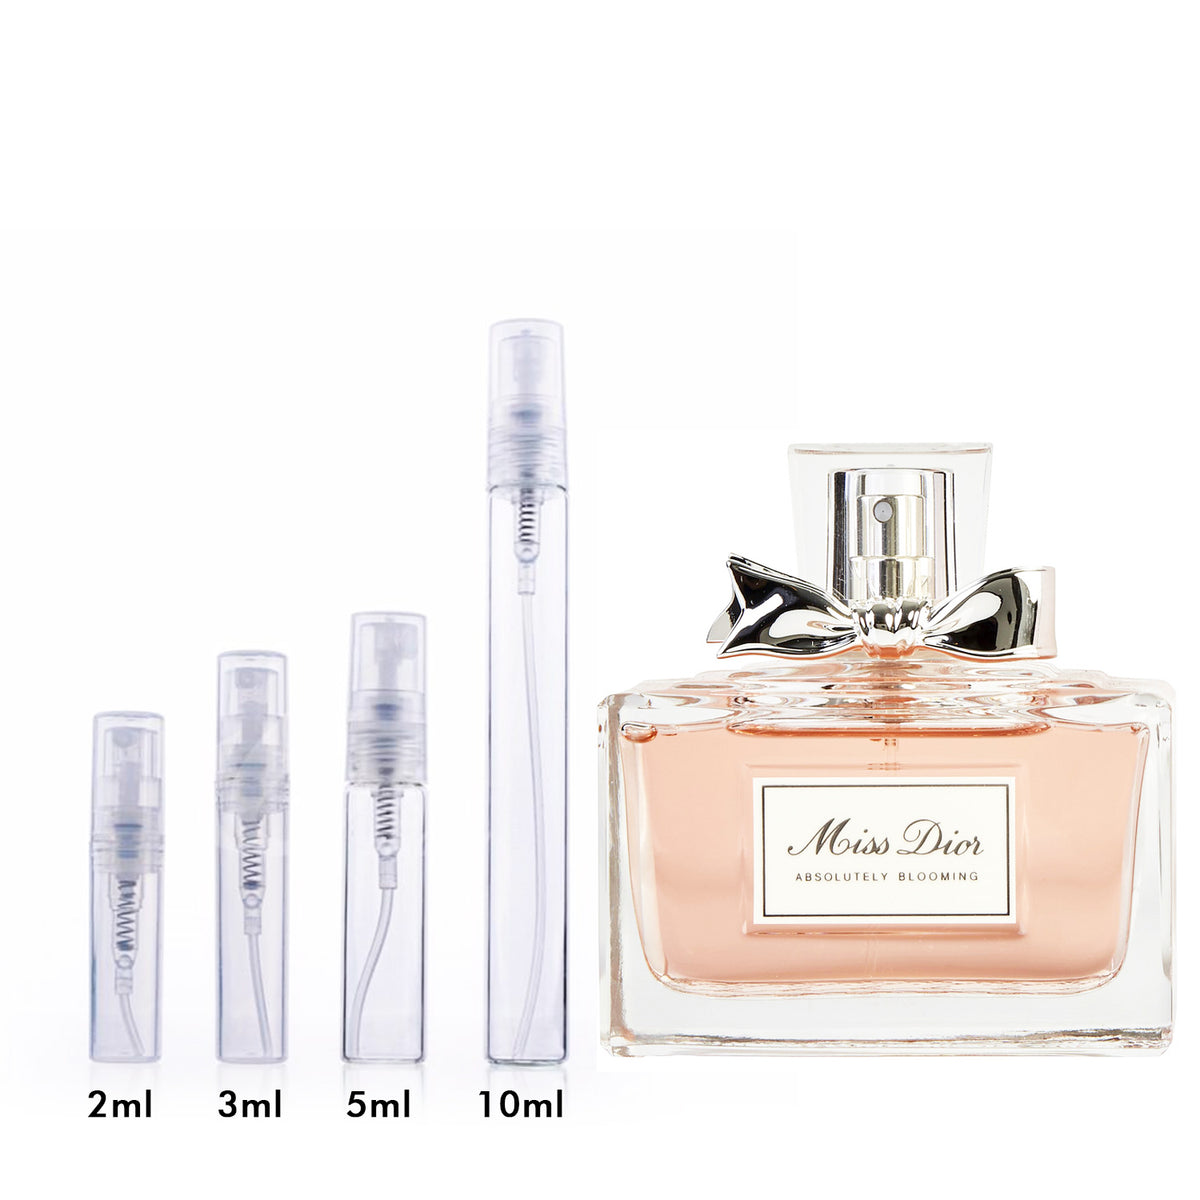 Miss Dior Absolutely Blooming Eau de Parfum – eCosmetics: Popular Brands,  Fast Free Shipping, 100% Guaranteed